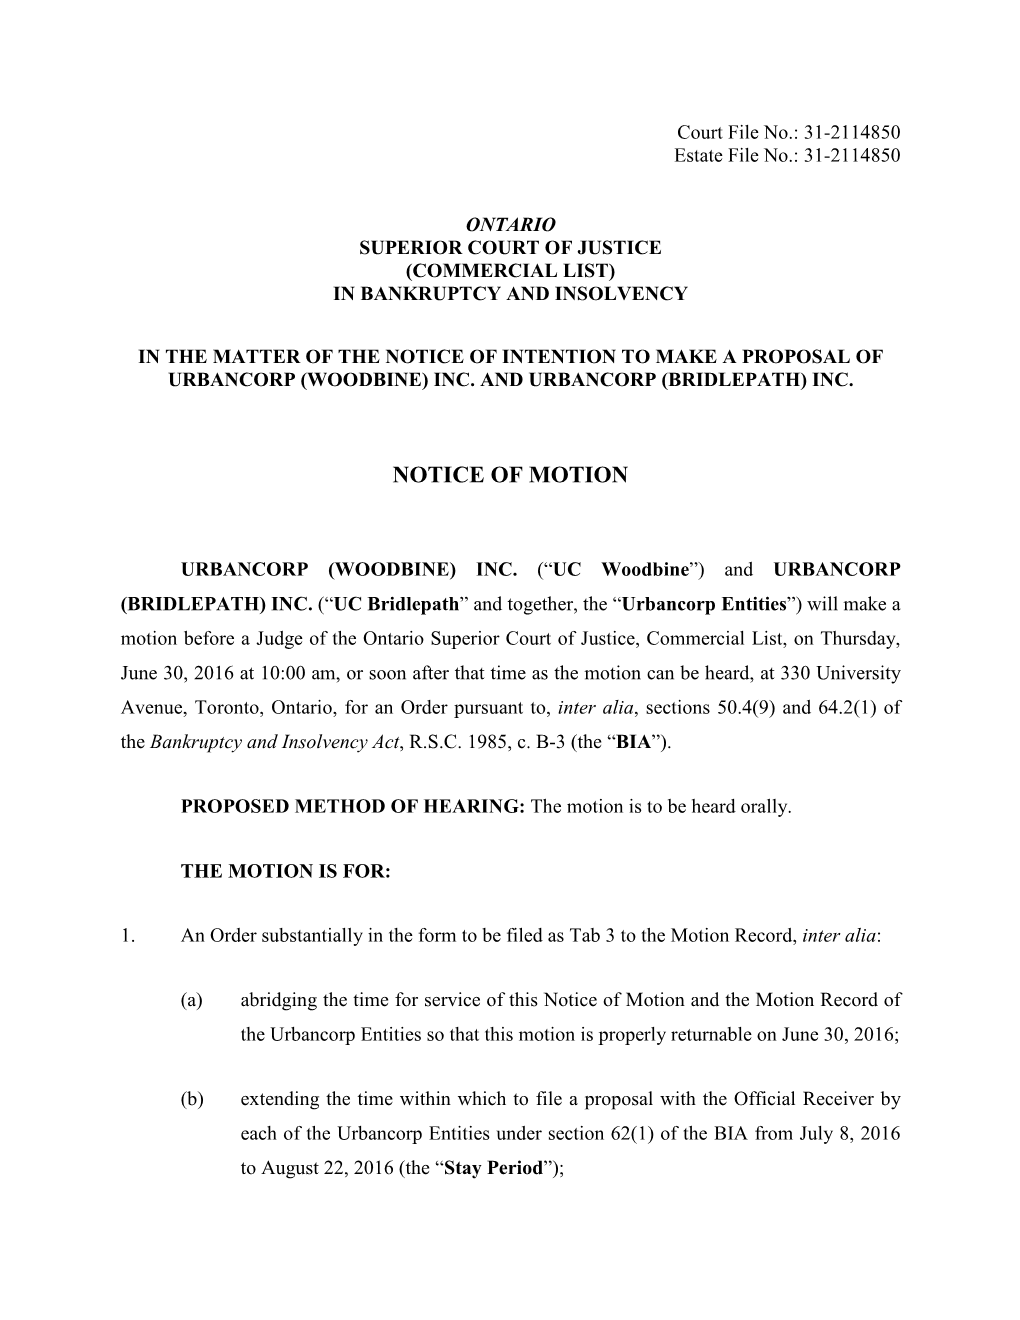 Notice of Motion Returnable June 30, 2016